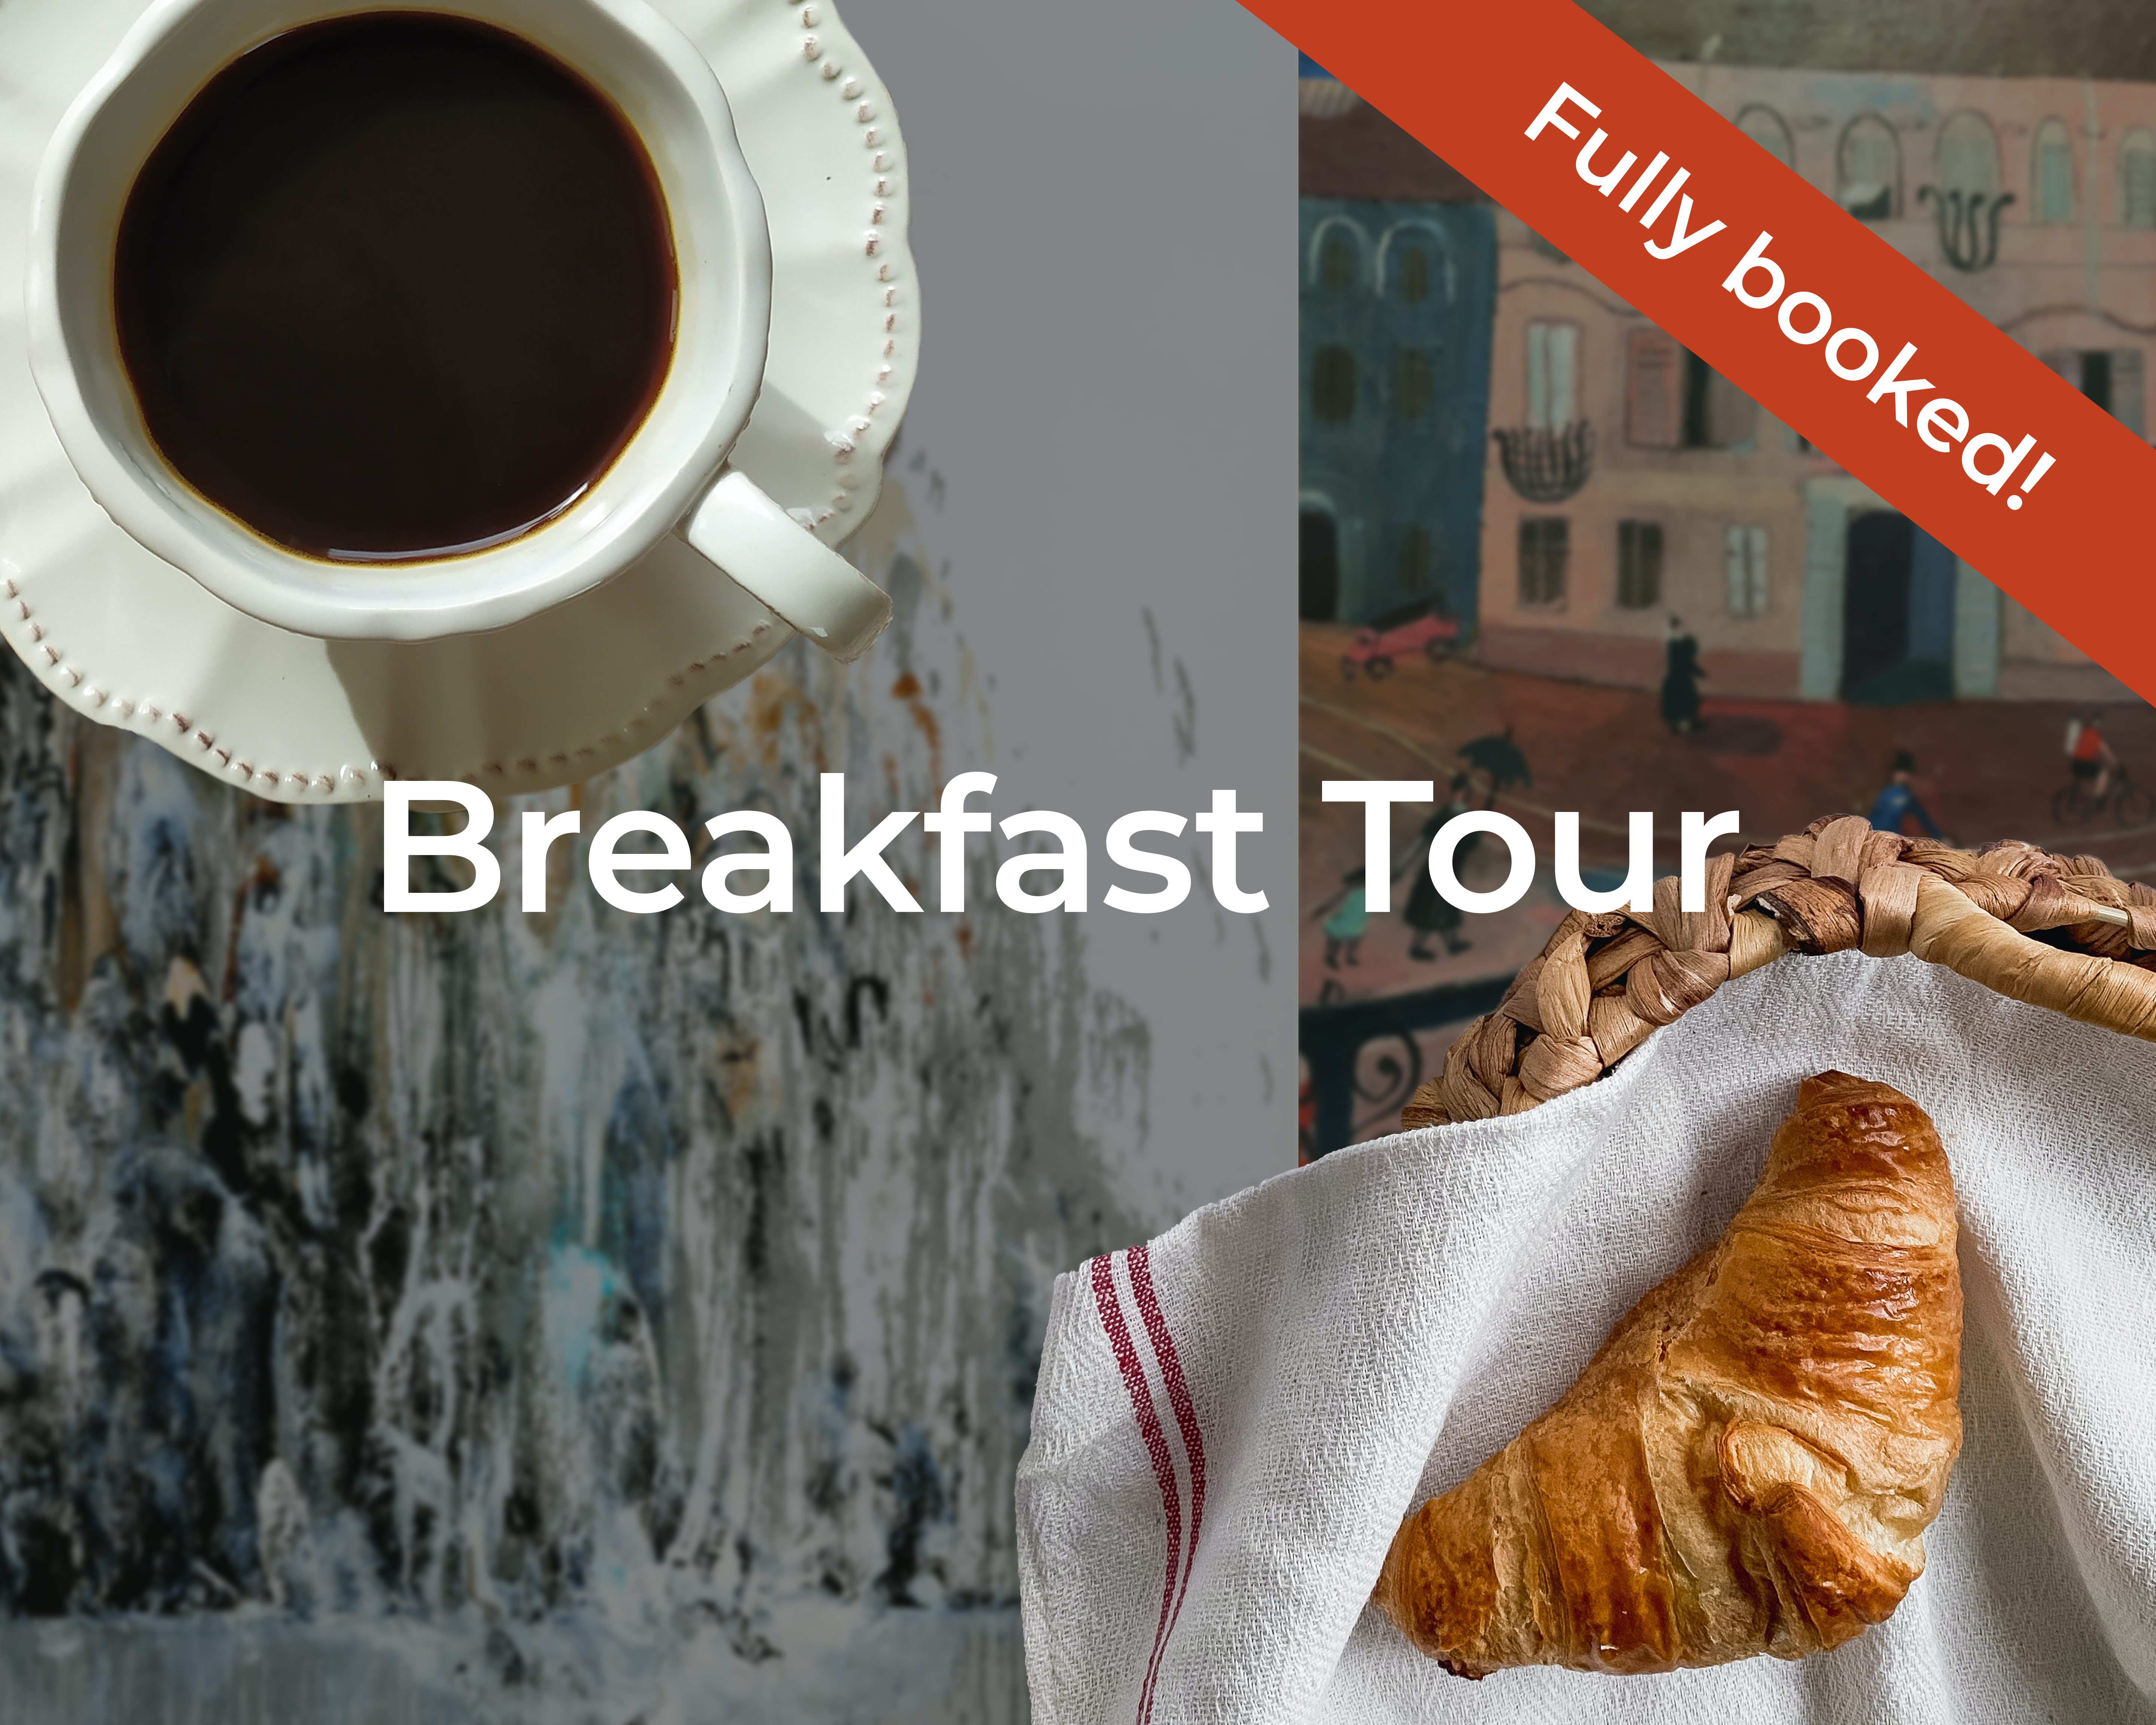 An image of a croissant in a basket with a cup of coffee to the left of it. There are two details of artwork in the background. To the left is 'Wall of Water I' by Maggi Hambling and to the right is, 'Street Sceen' by Suzanne Cooper. There is overlayed text which reads: Breakfast Tour. There is a red banner overlayed in the top right corner which reads: Fully booked!